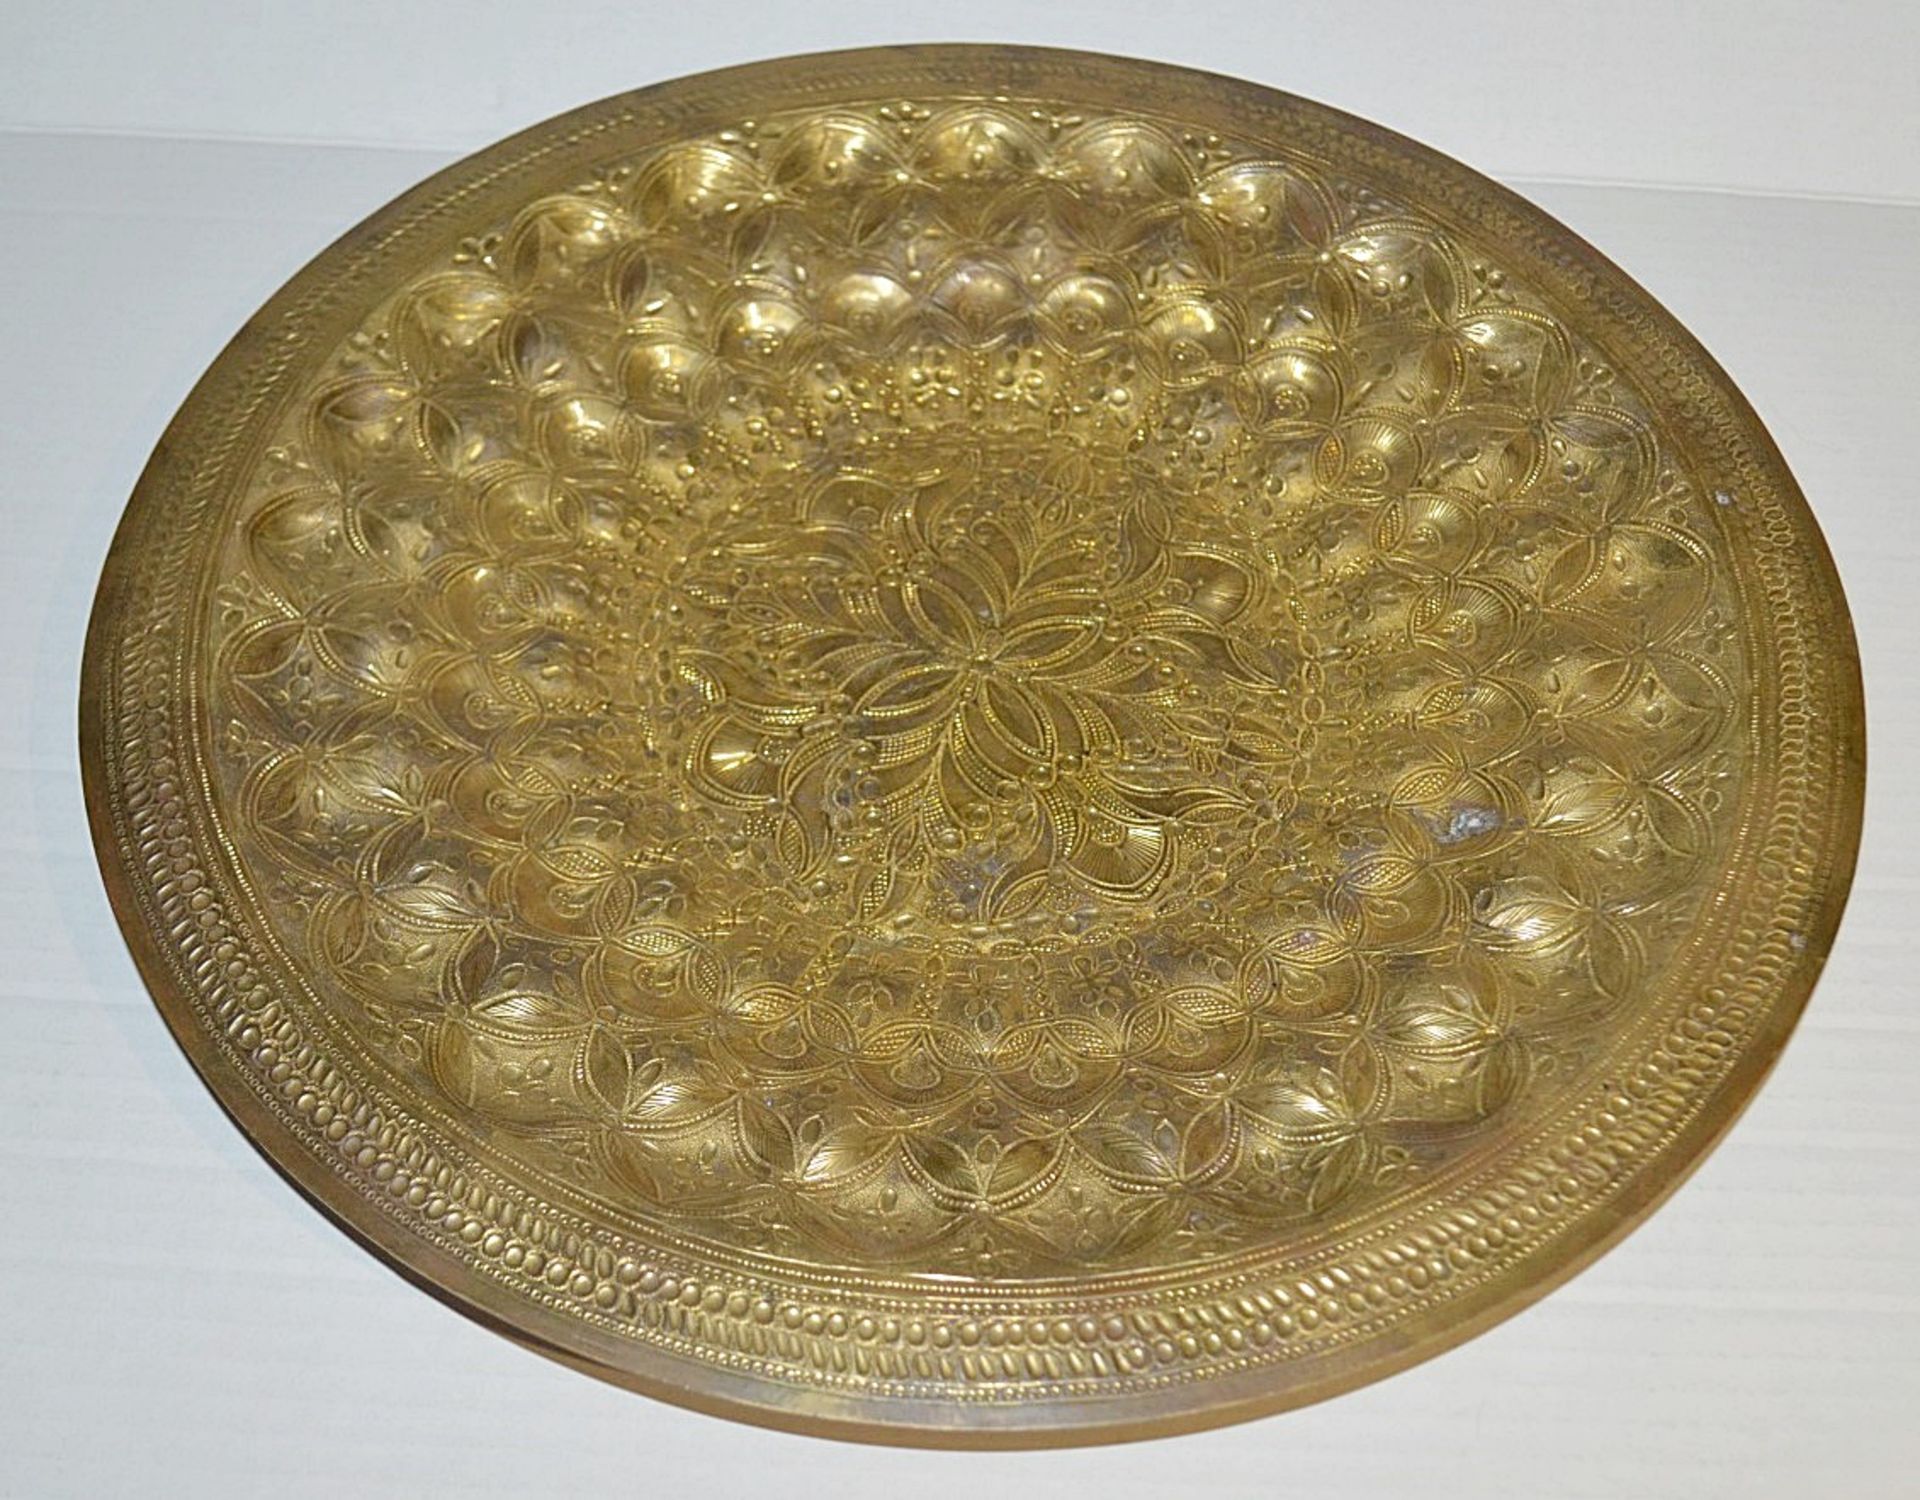 1 x Persian / Ottoman Gilt Metal Tombak Charger - 35cm (13.75ins) In Diameter - Preowned - NO VAT ON